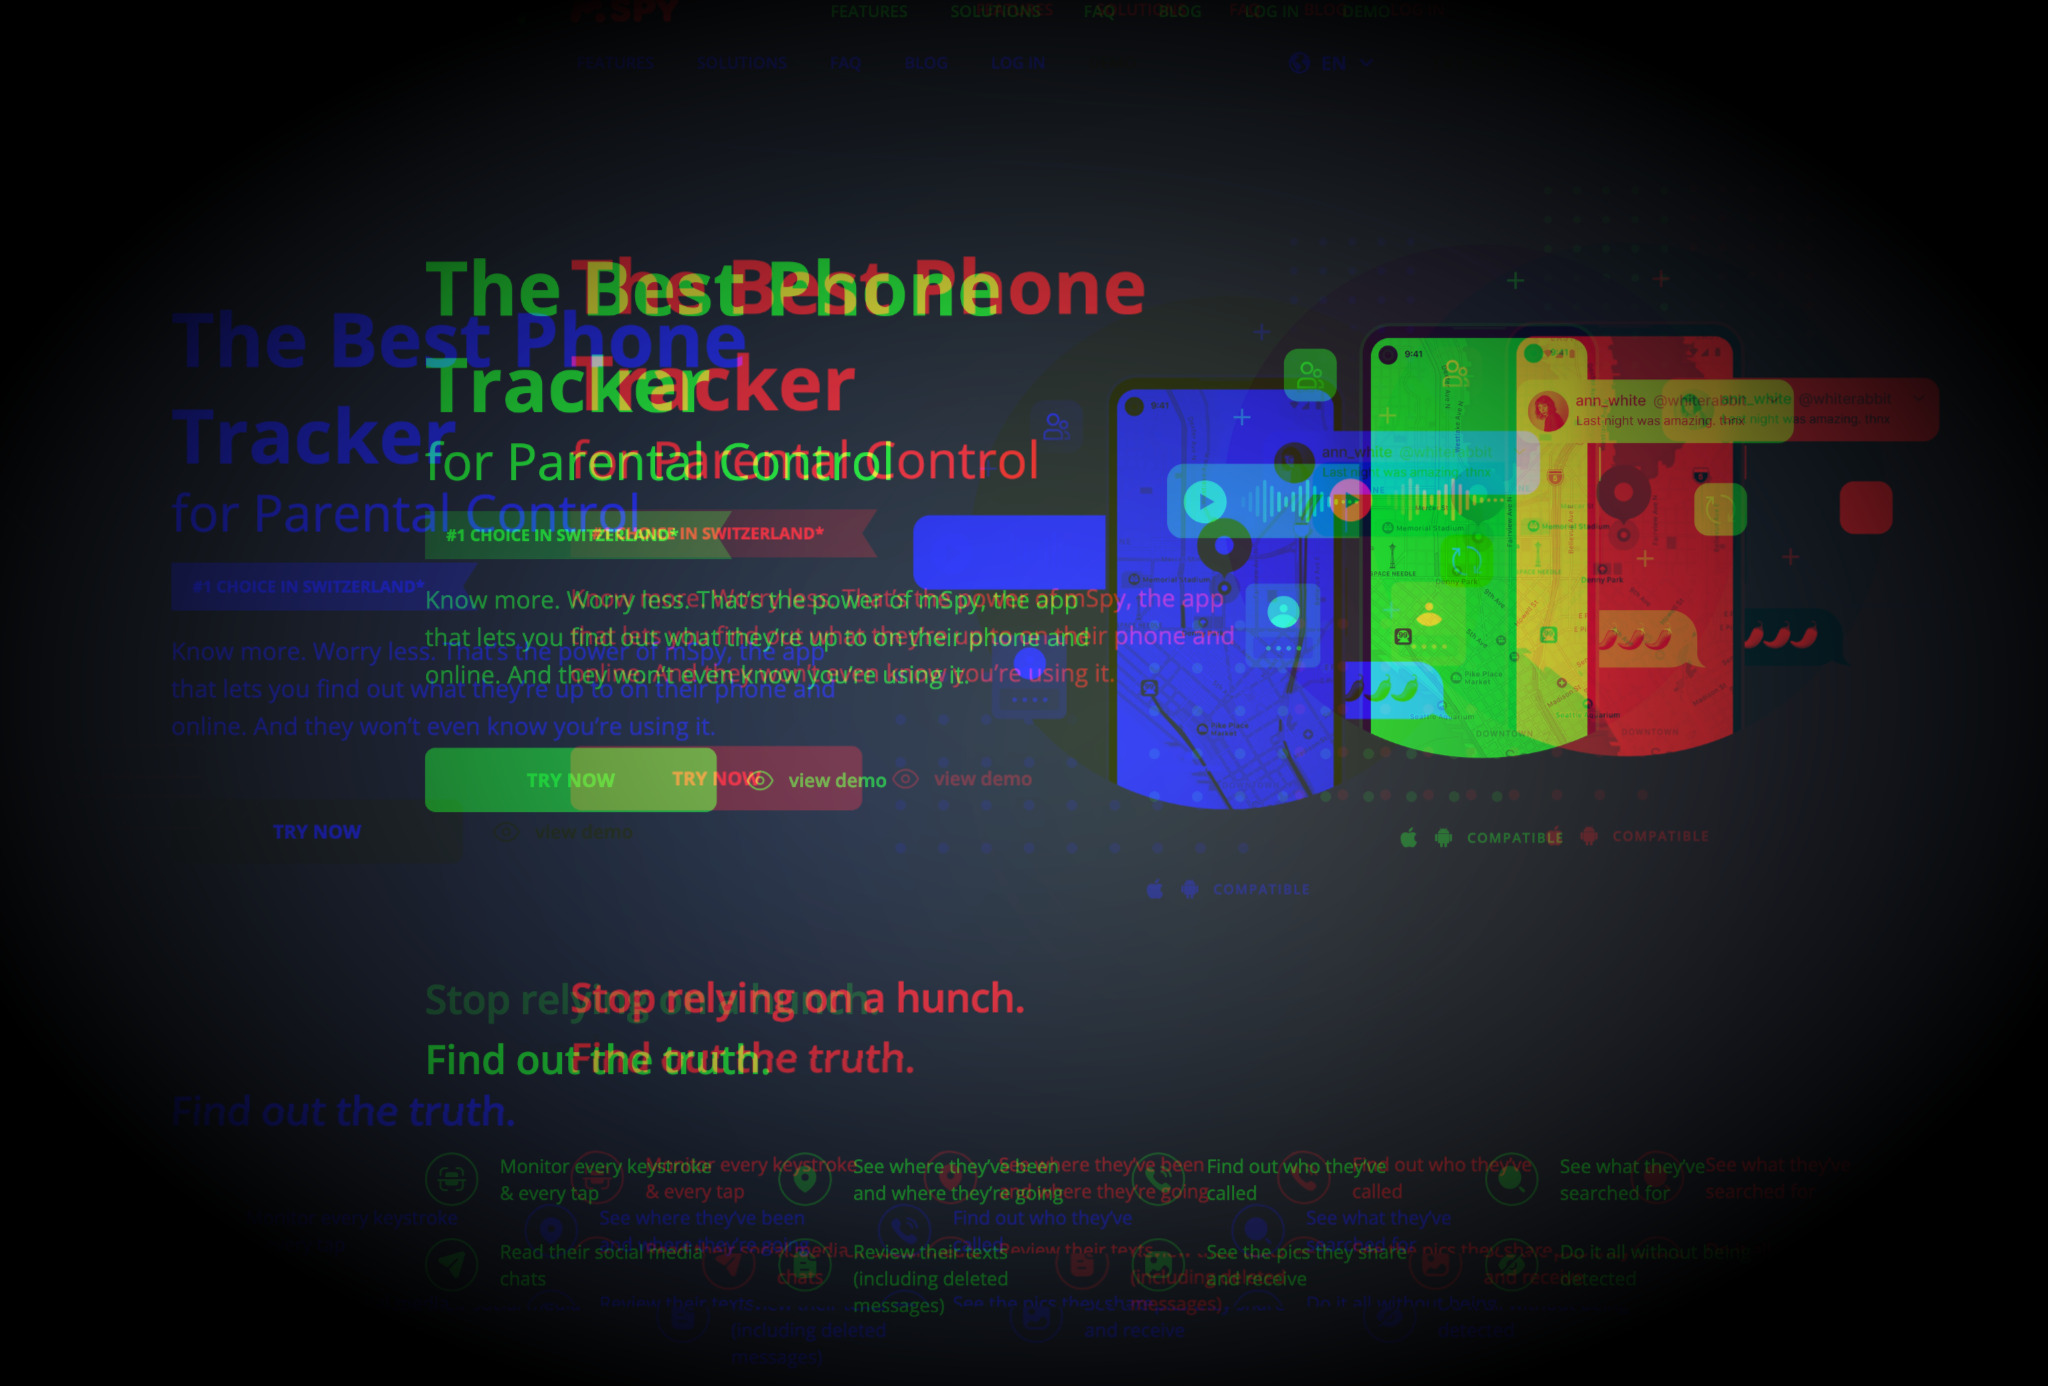 a glitchy edited screenshot of the landing page for a stalkerware product